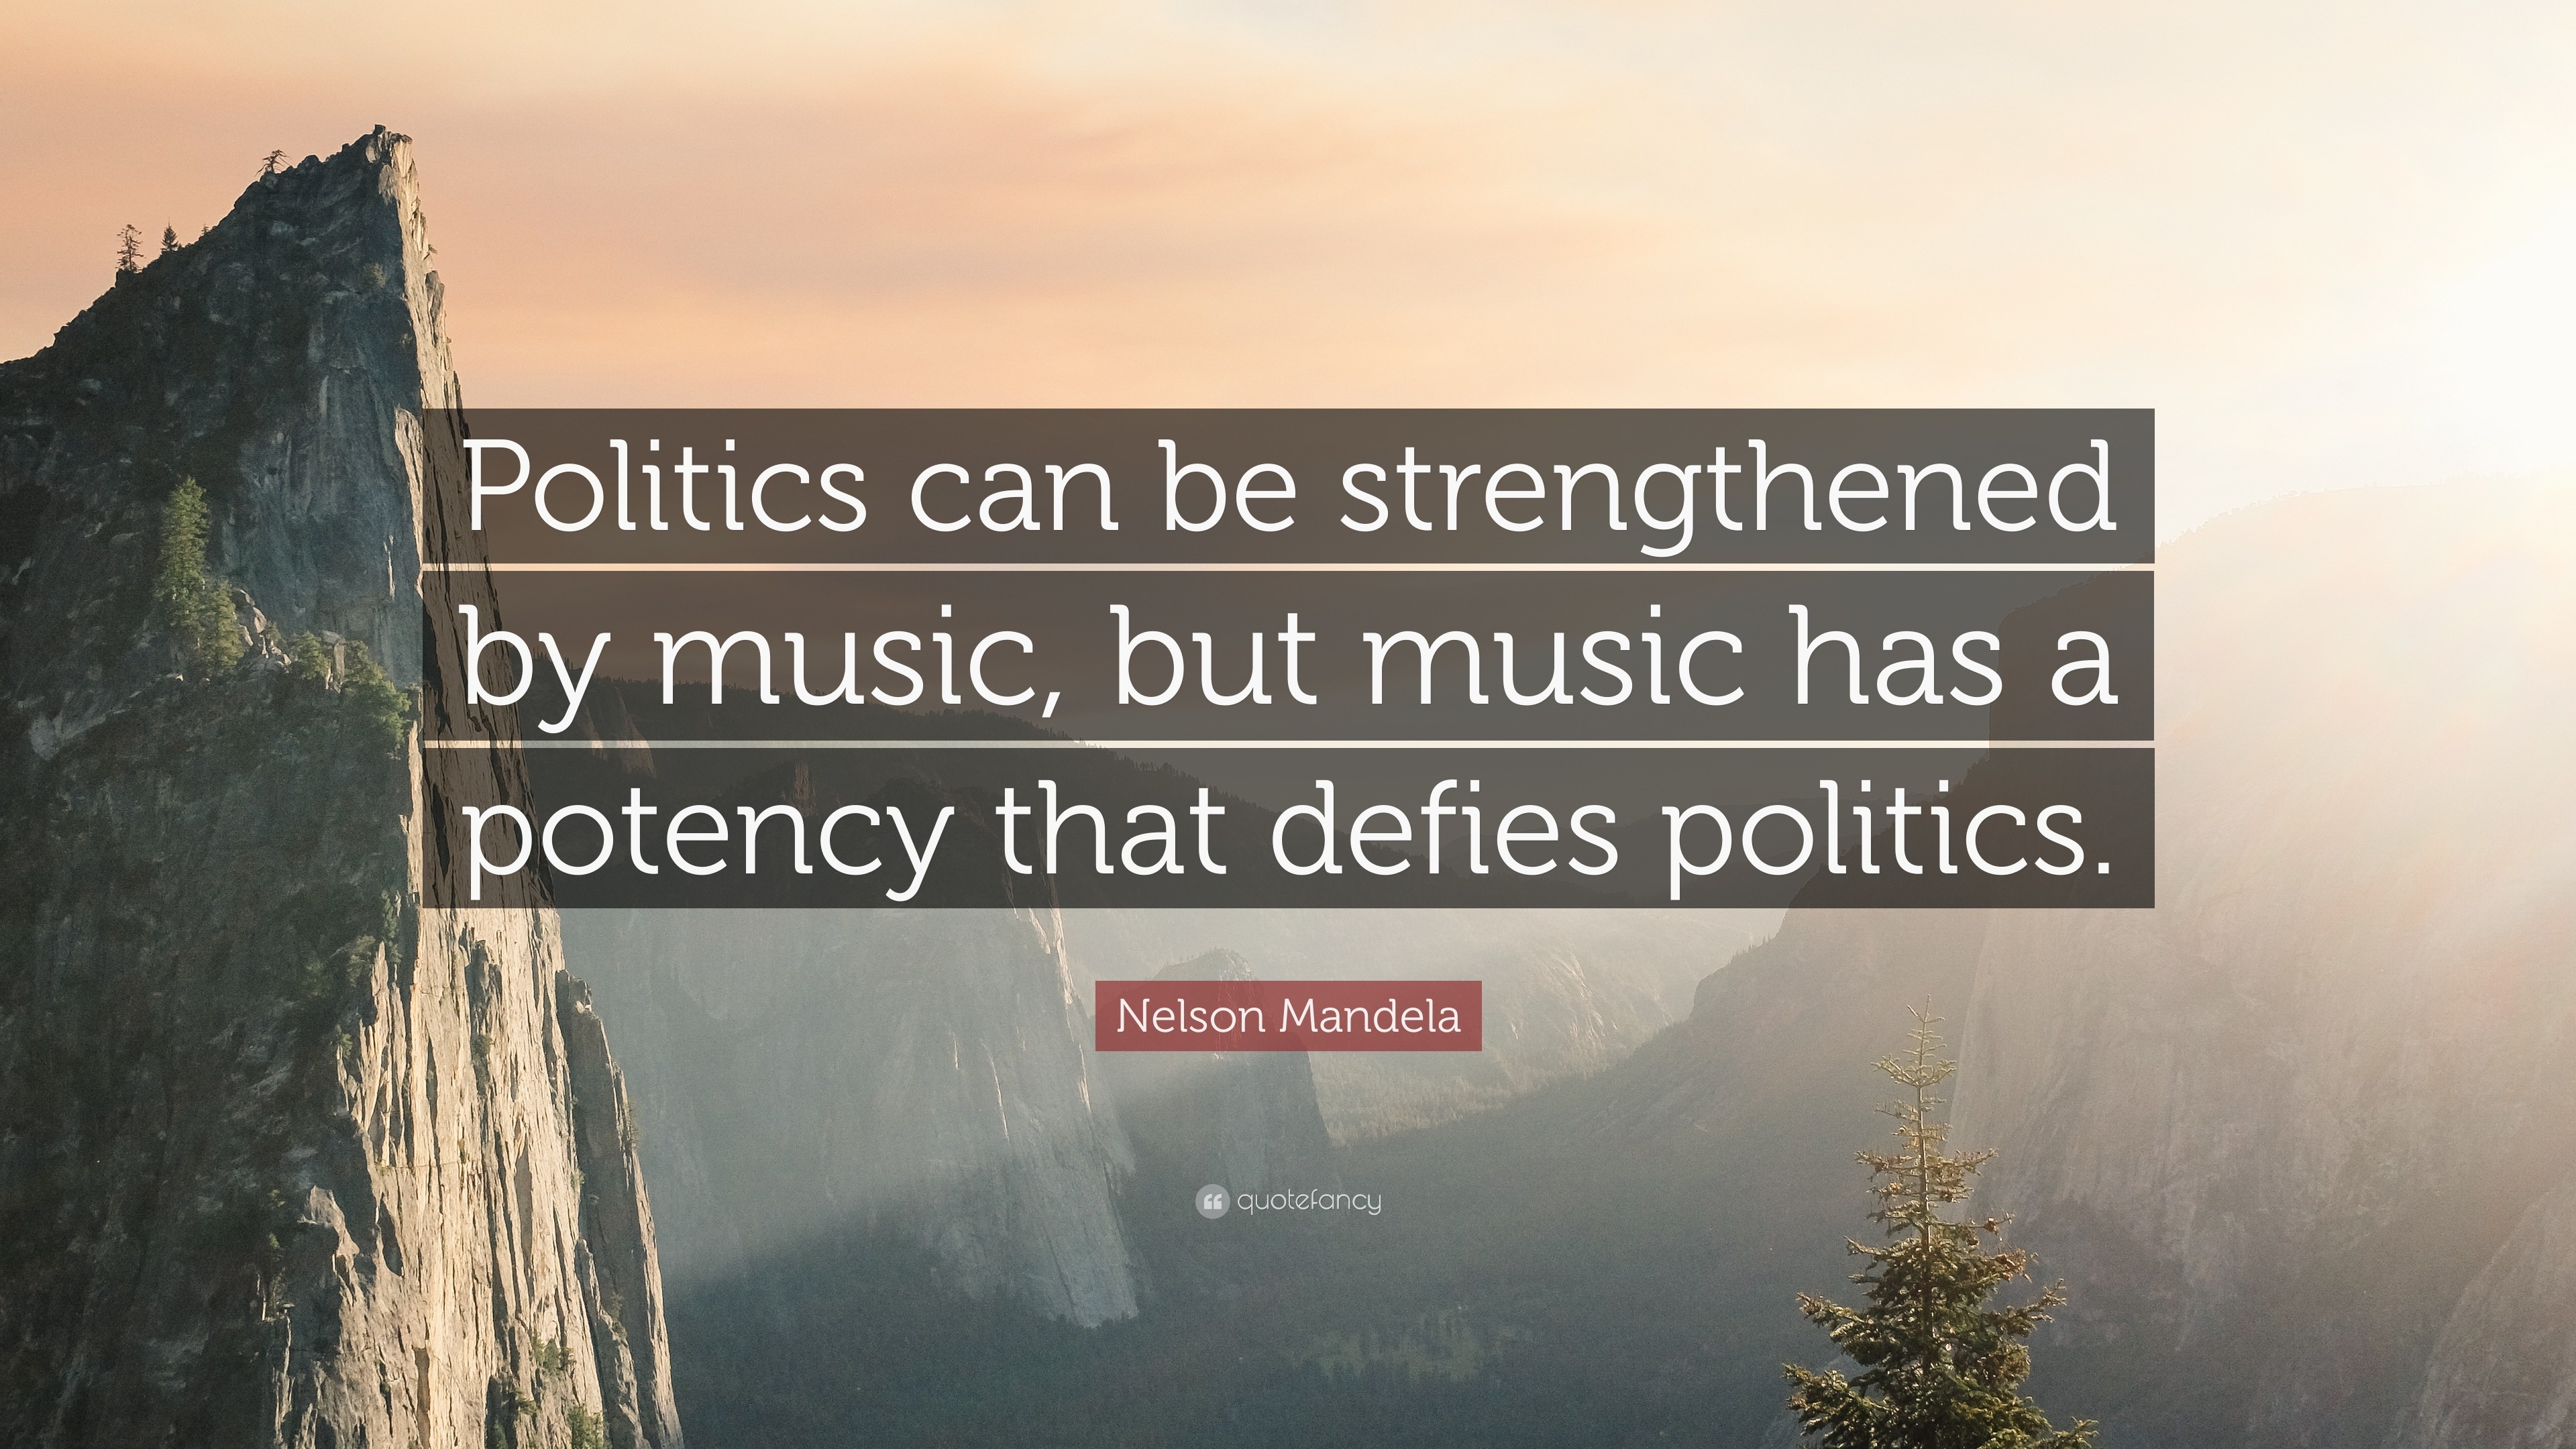 Nelson Mandela Quote “politics Can Be Strengthened By Music But Music Has A Potency That